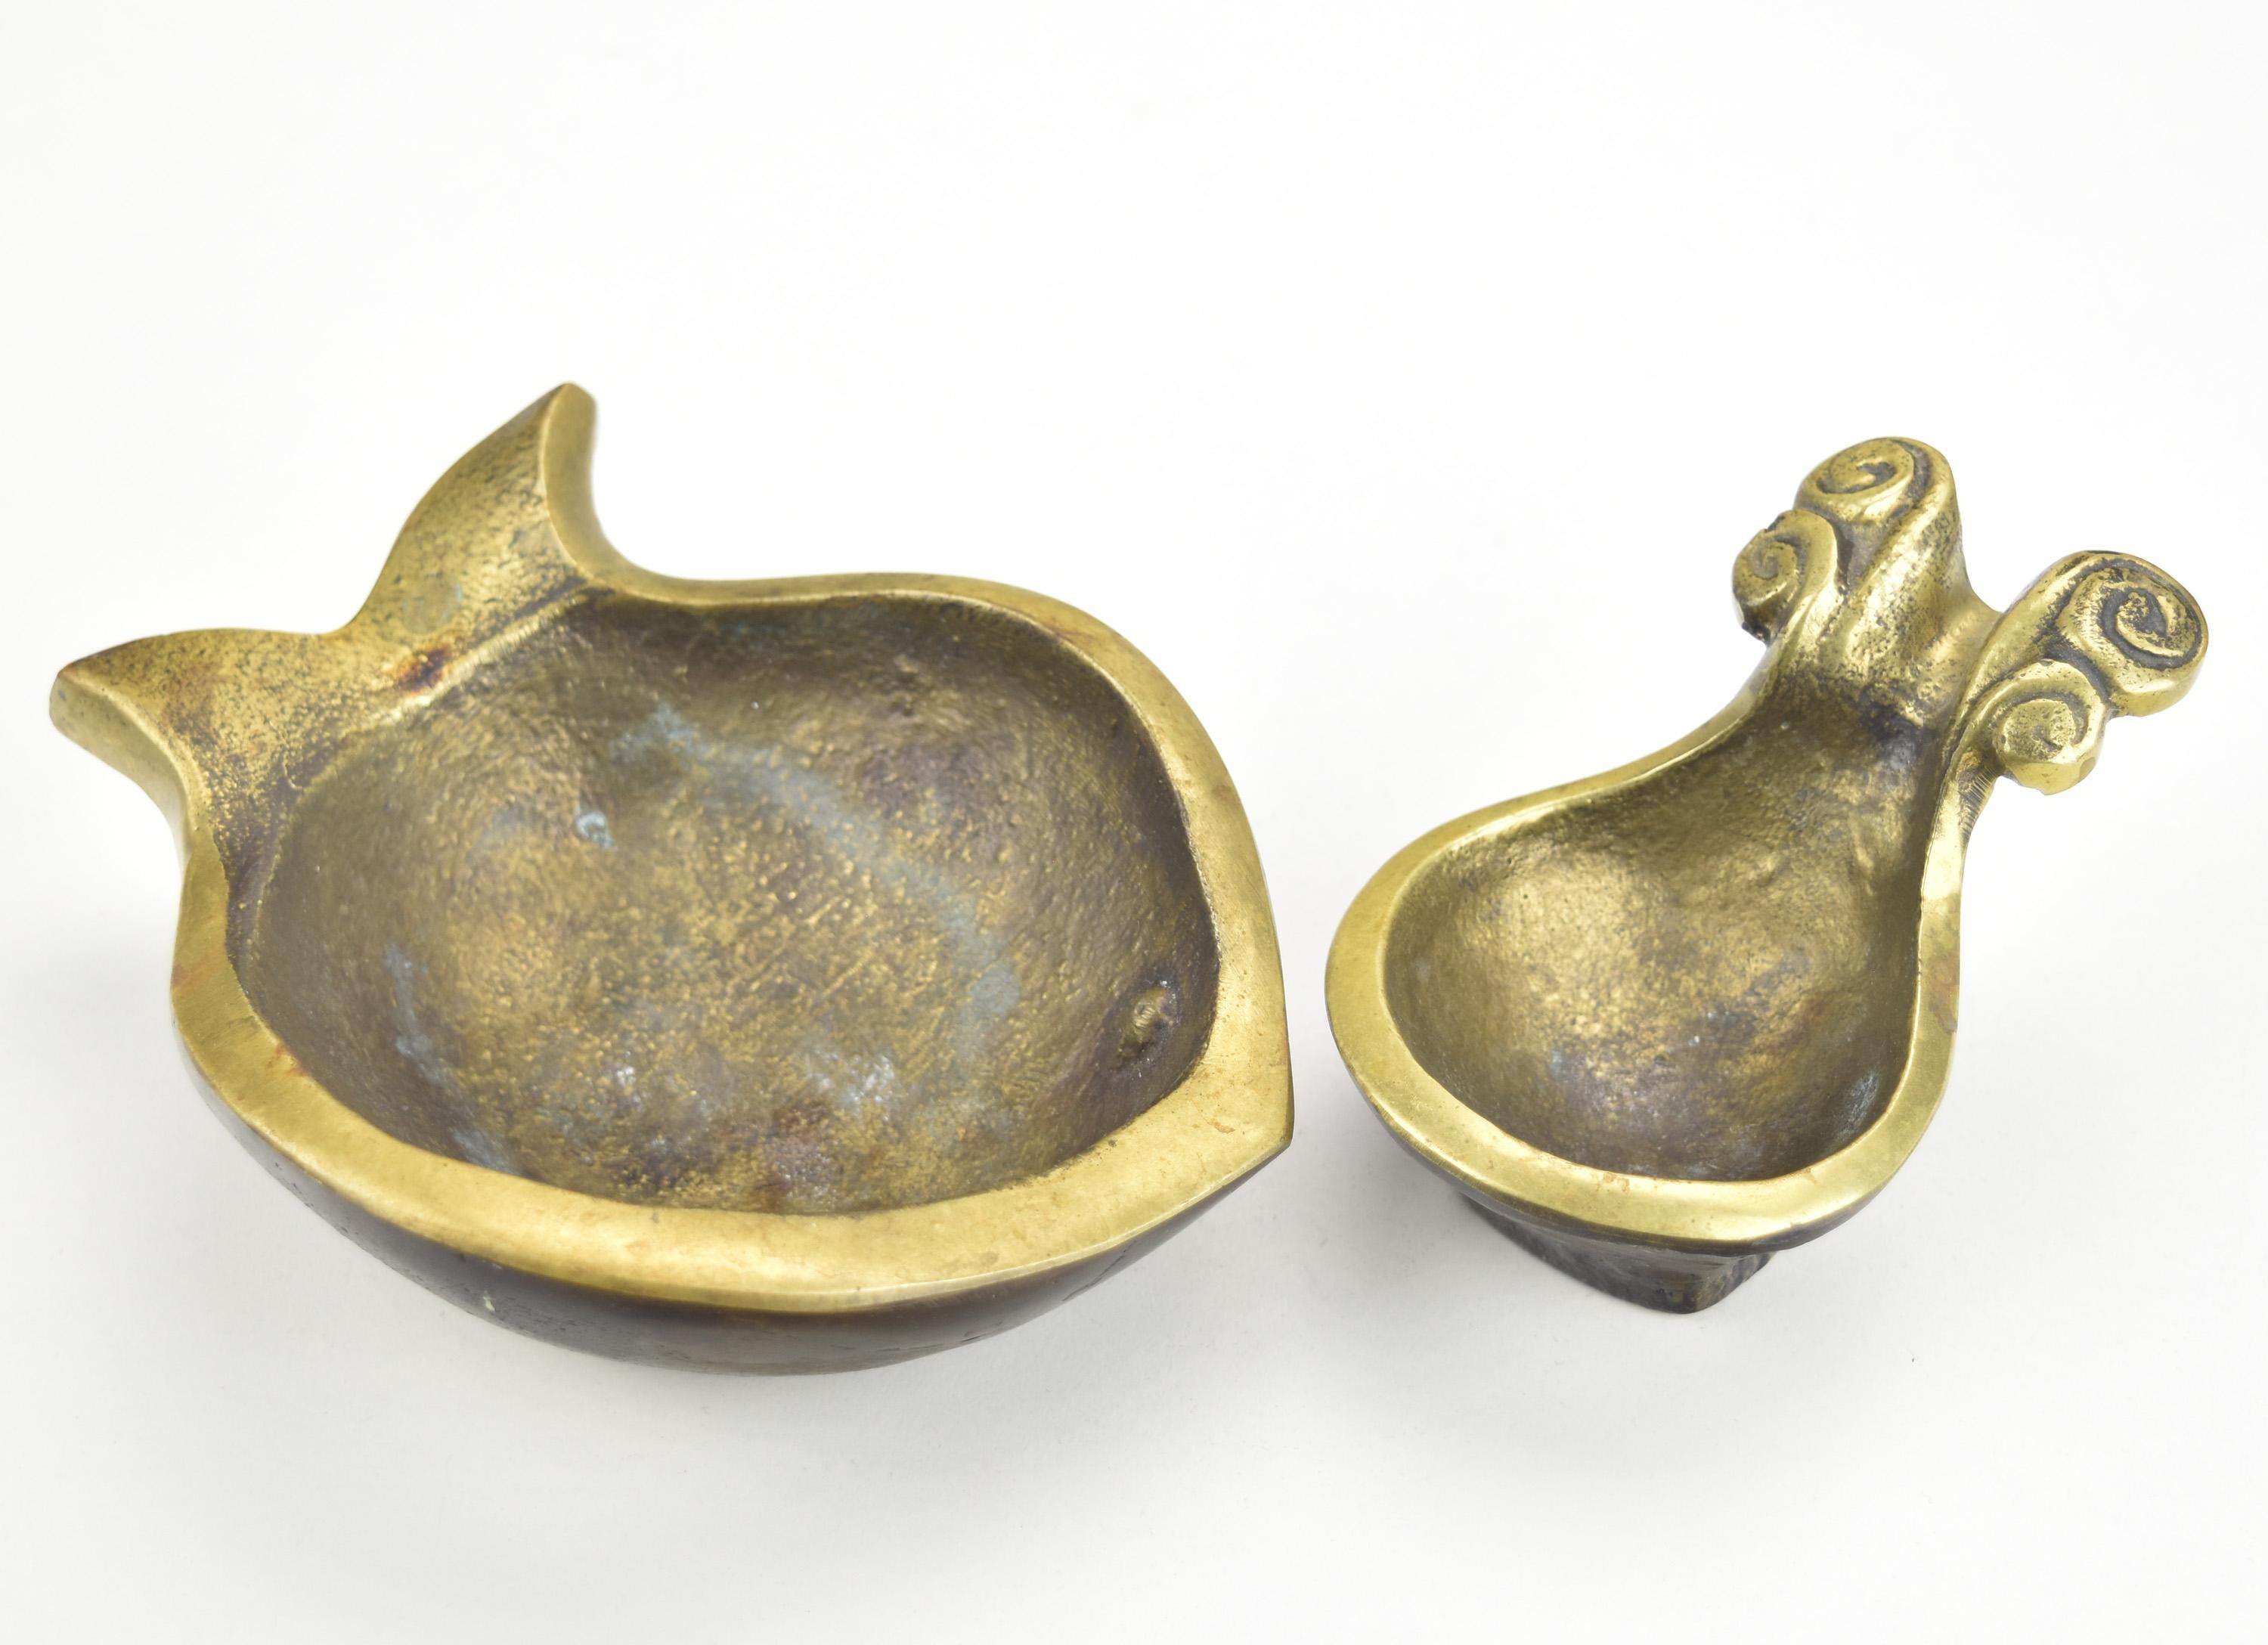 A nice vintage heavy cast bronze set of an ashtray and a pipe rest by Swiss artist Willy Steinlin

Maker: Willy Steinlin
Marks: signed
Period: ca. 1950/60s
Maximum length ca.: 14 cm / 5.5